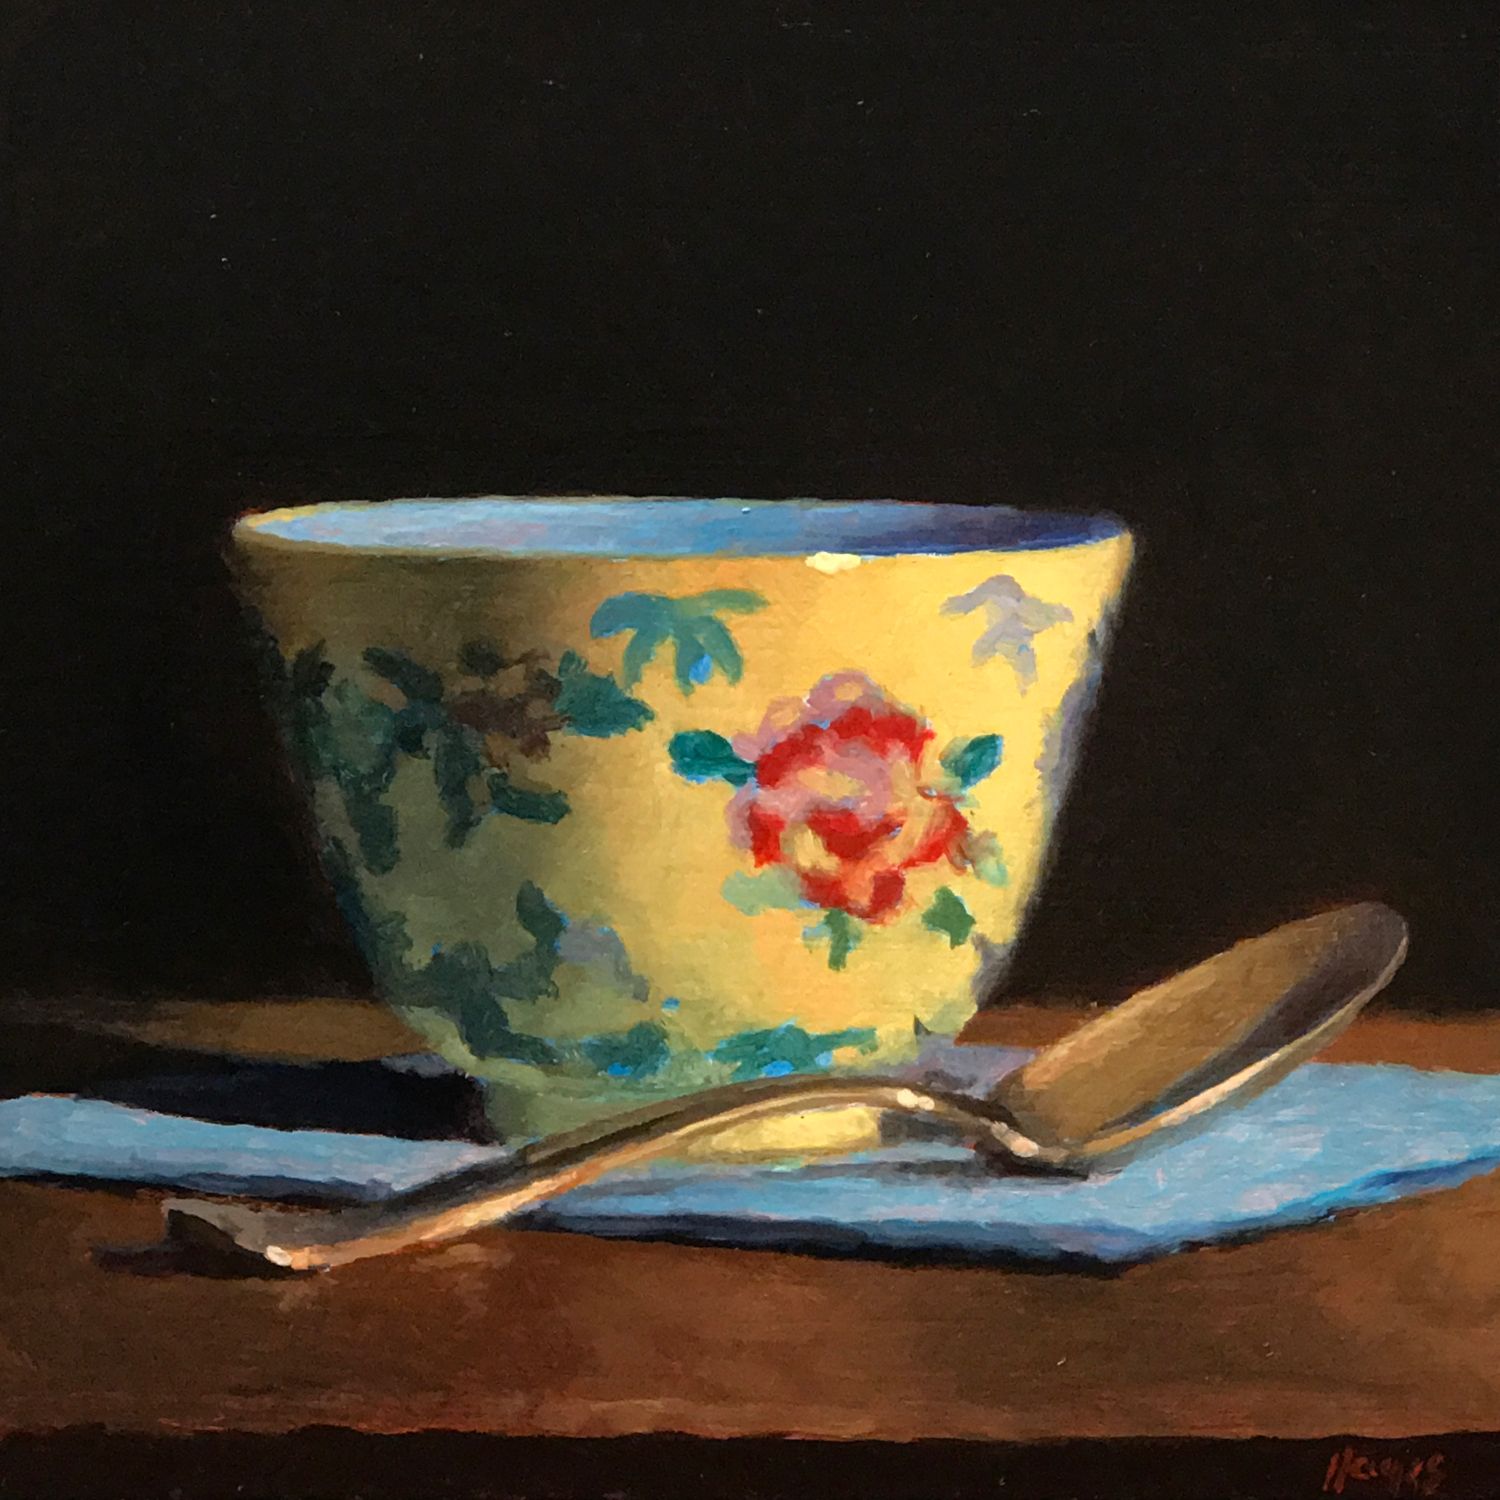 Silver Spoon, Chinese Teacup, Blue Napkin •